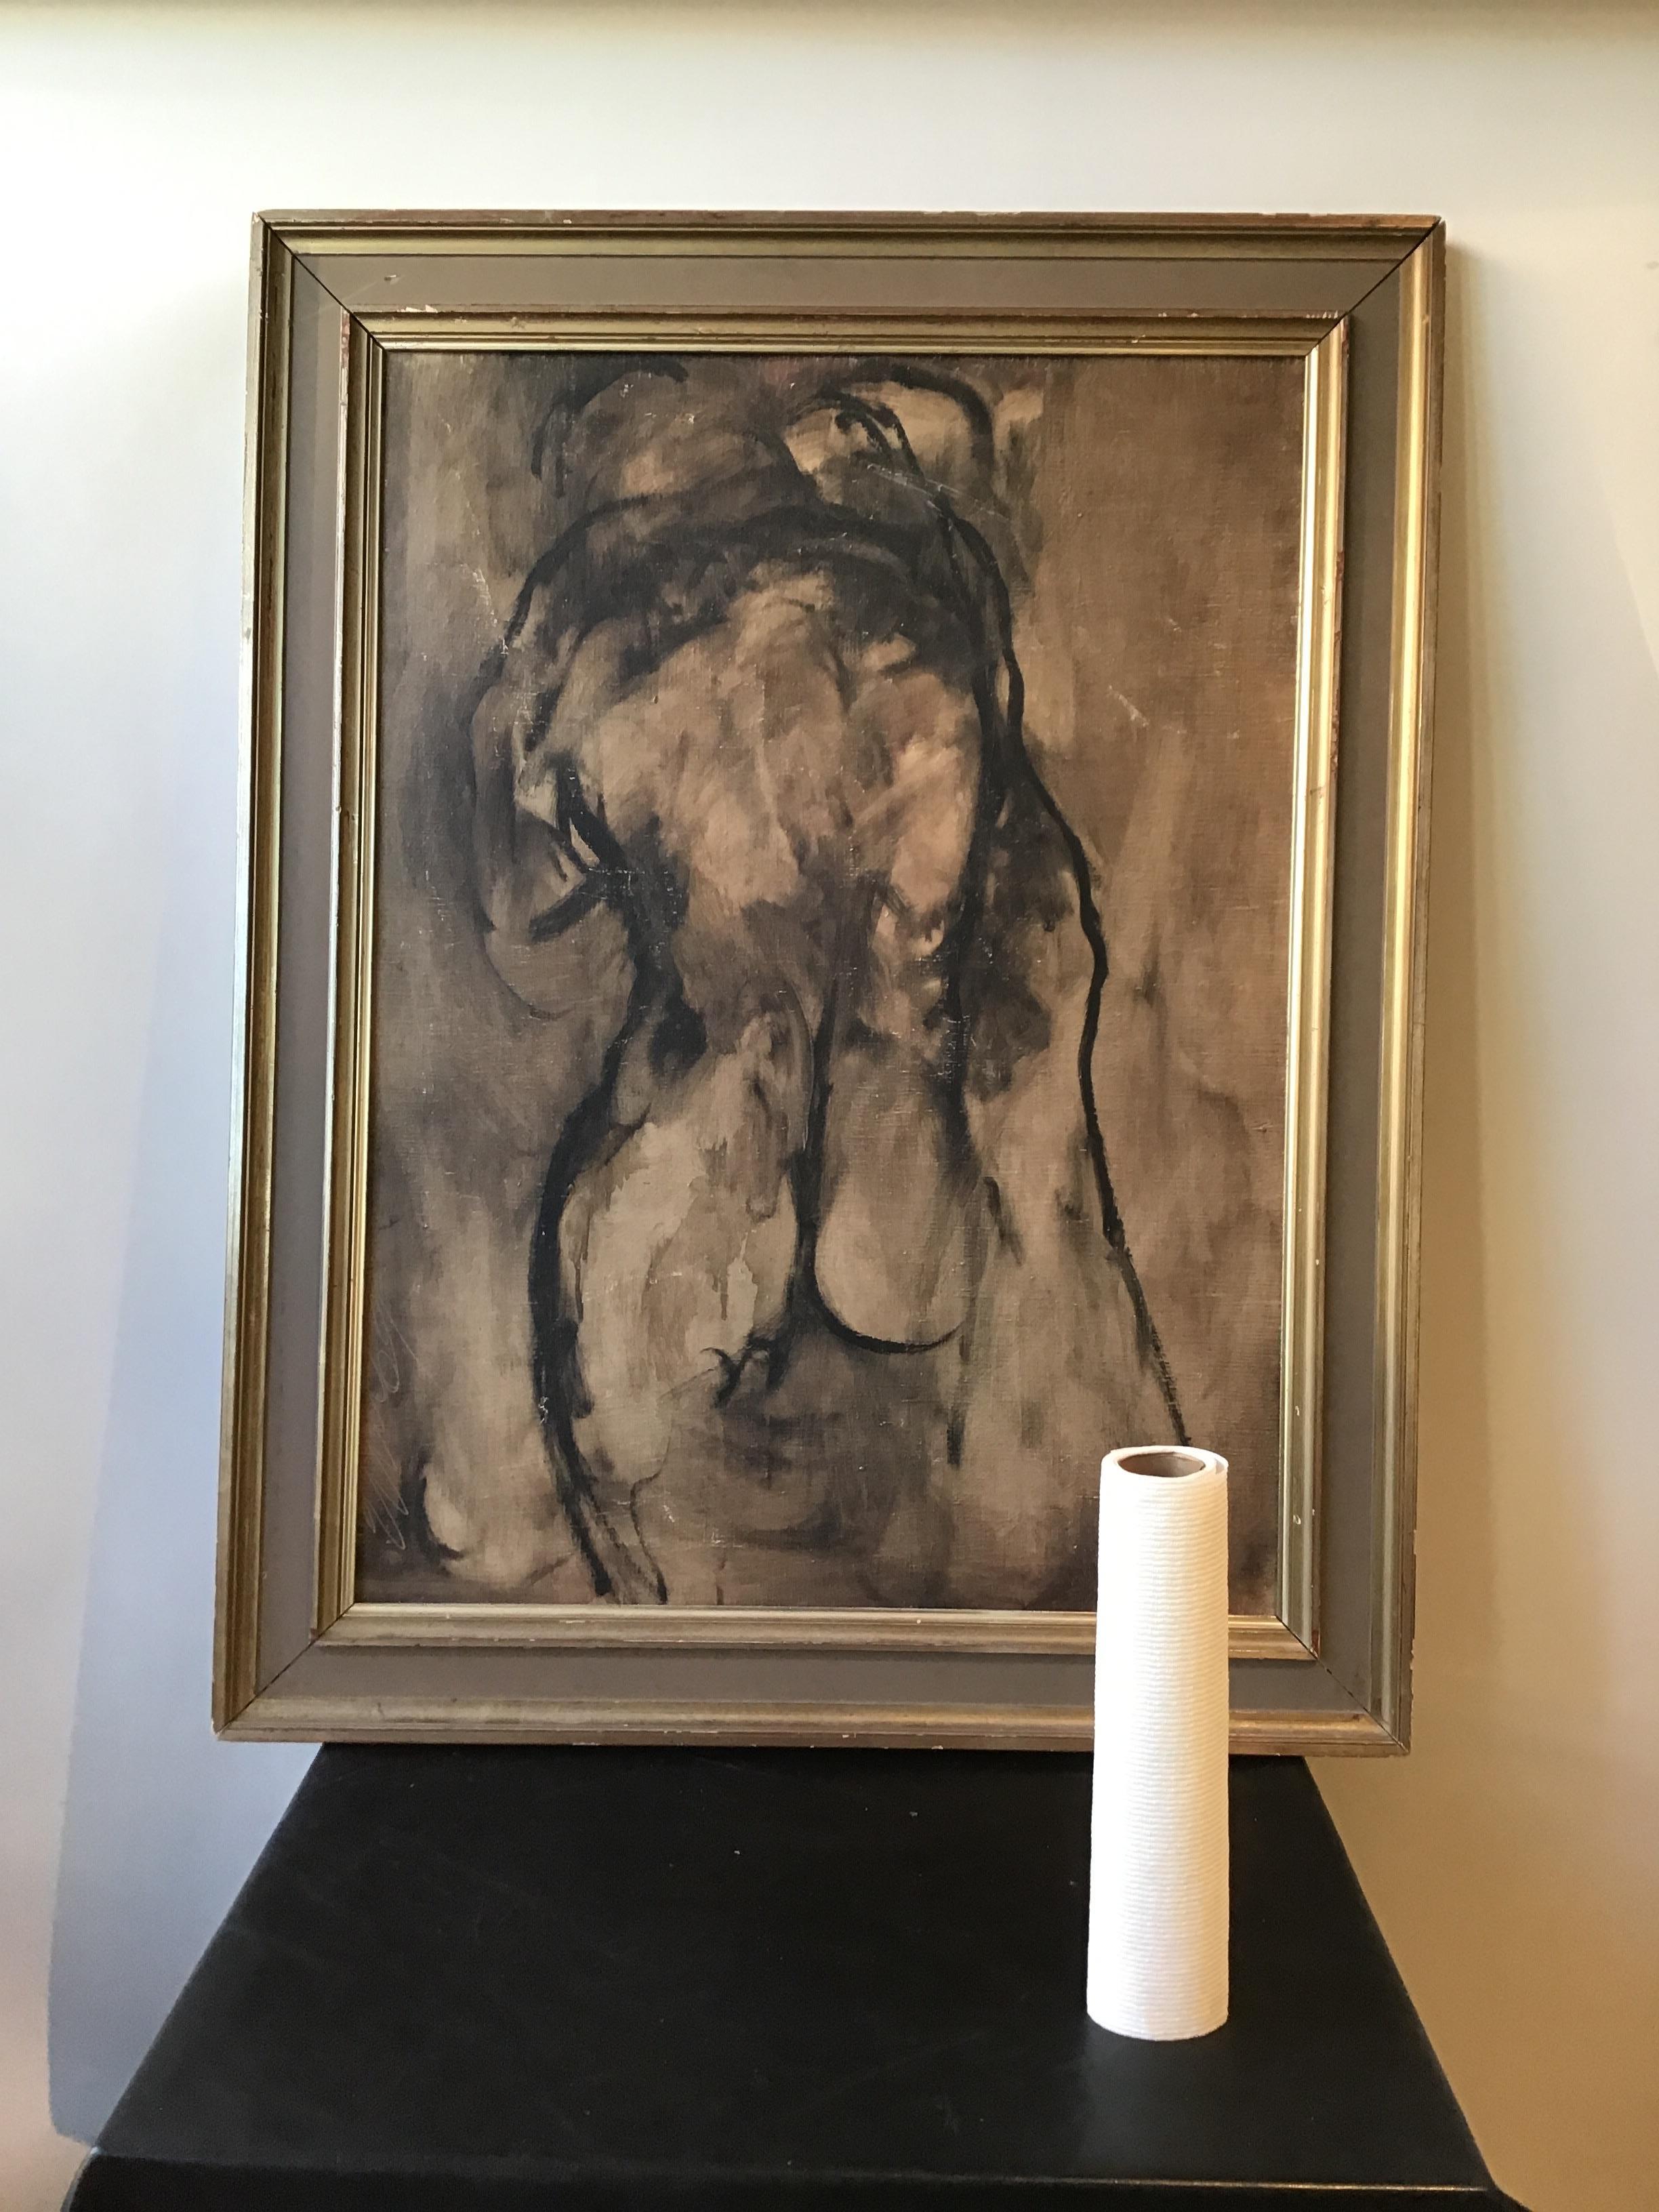 1950s Italian oil on canvas of two nudes embracing. Signed.